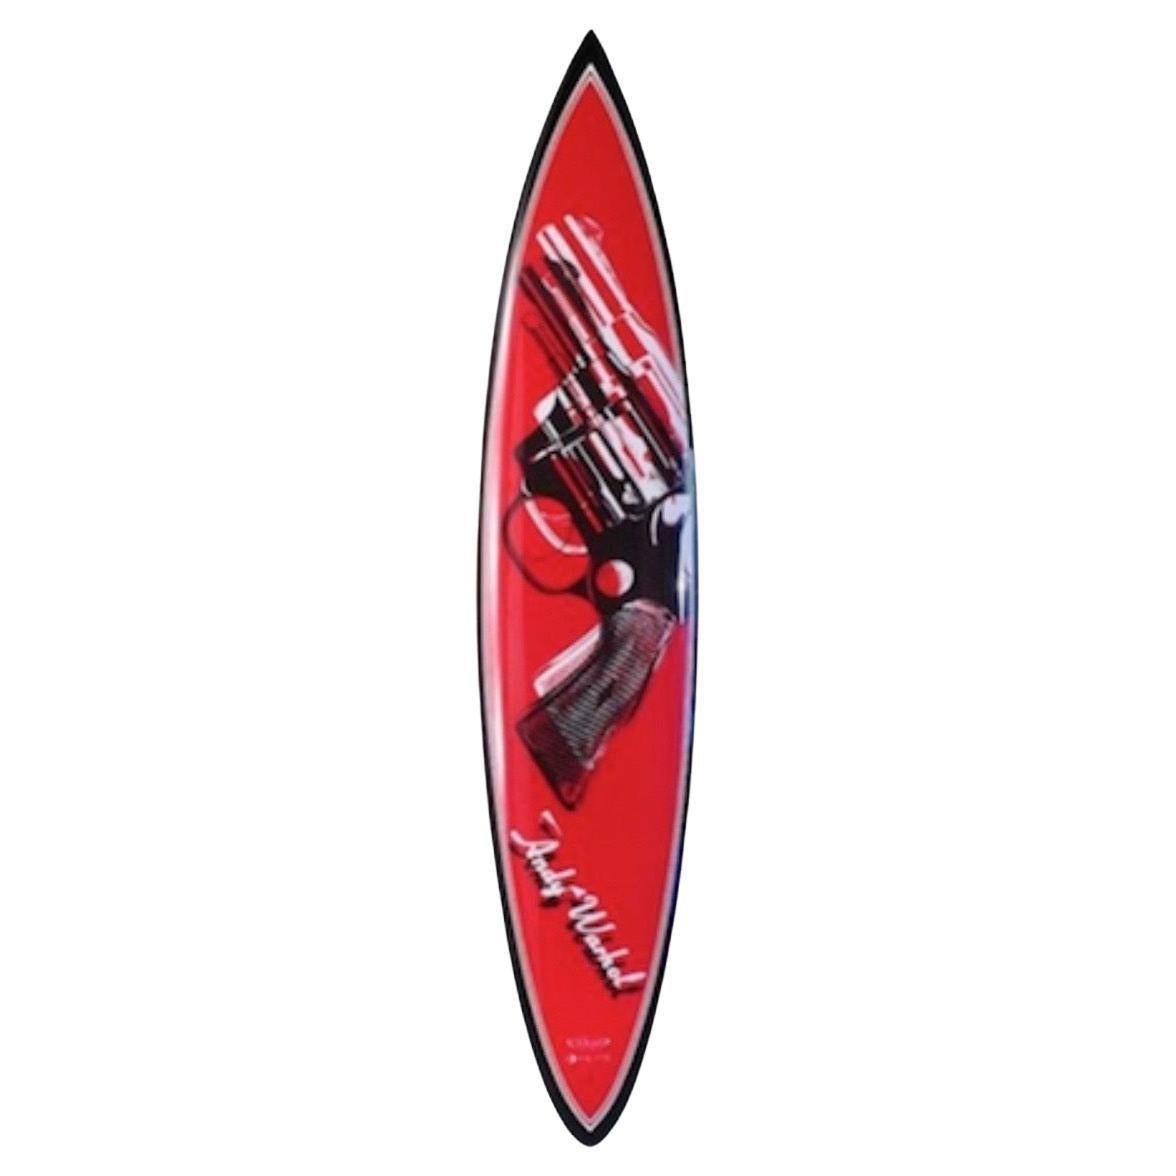 Limited Edition "Revolver" Surfboard / Sculpture by Andy Warhol & Tim Bessell For Sale